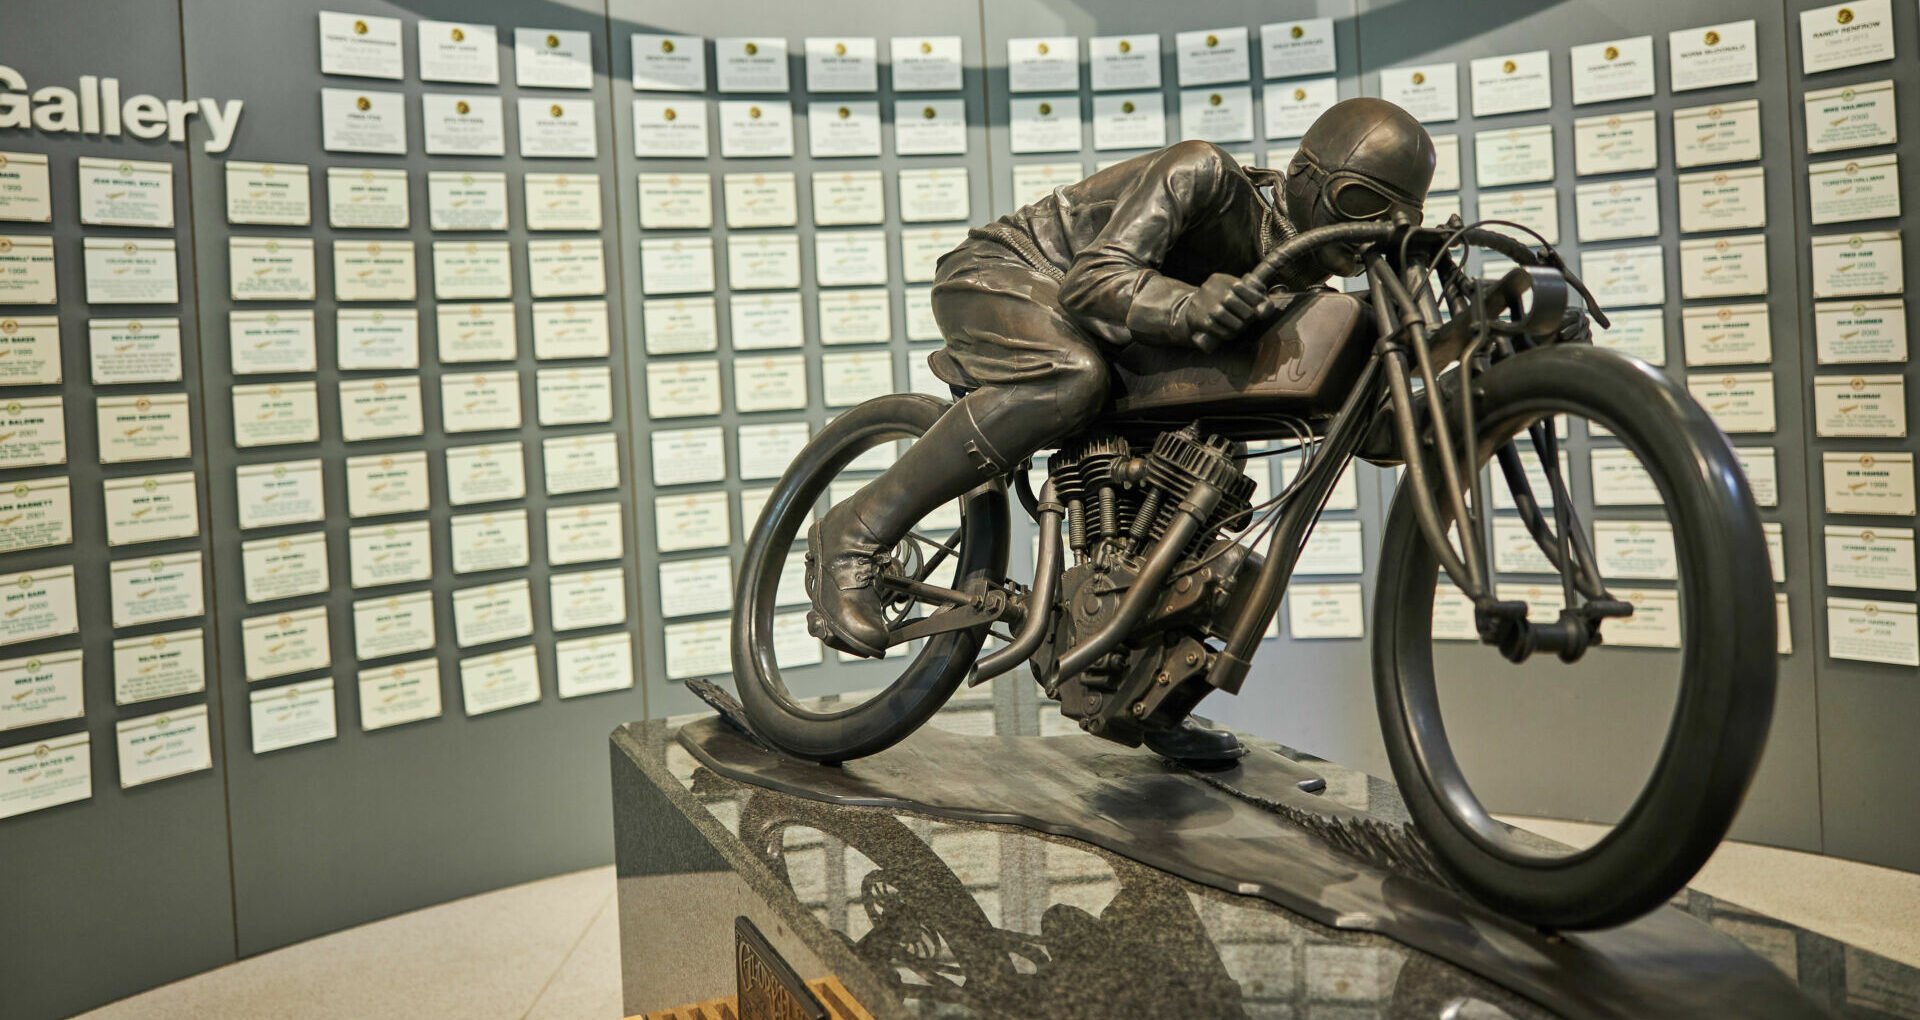 The Glory Days sculpture inside the AMA Motorcycle Hall of Fame. Photo courtesy AMA.